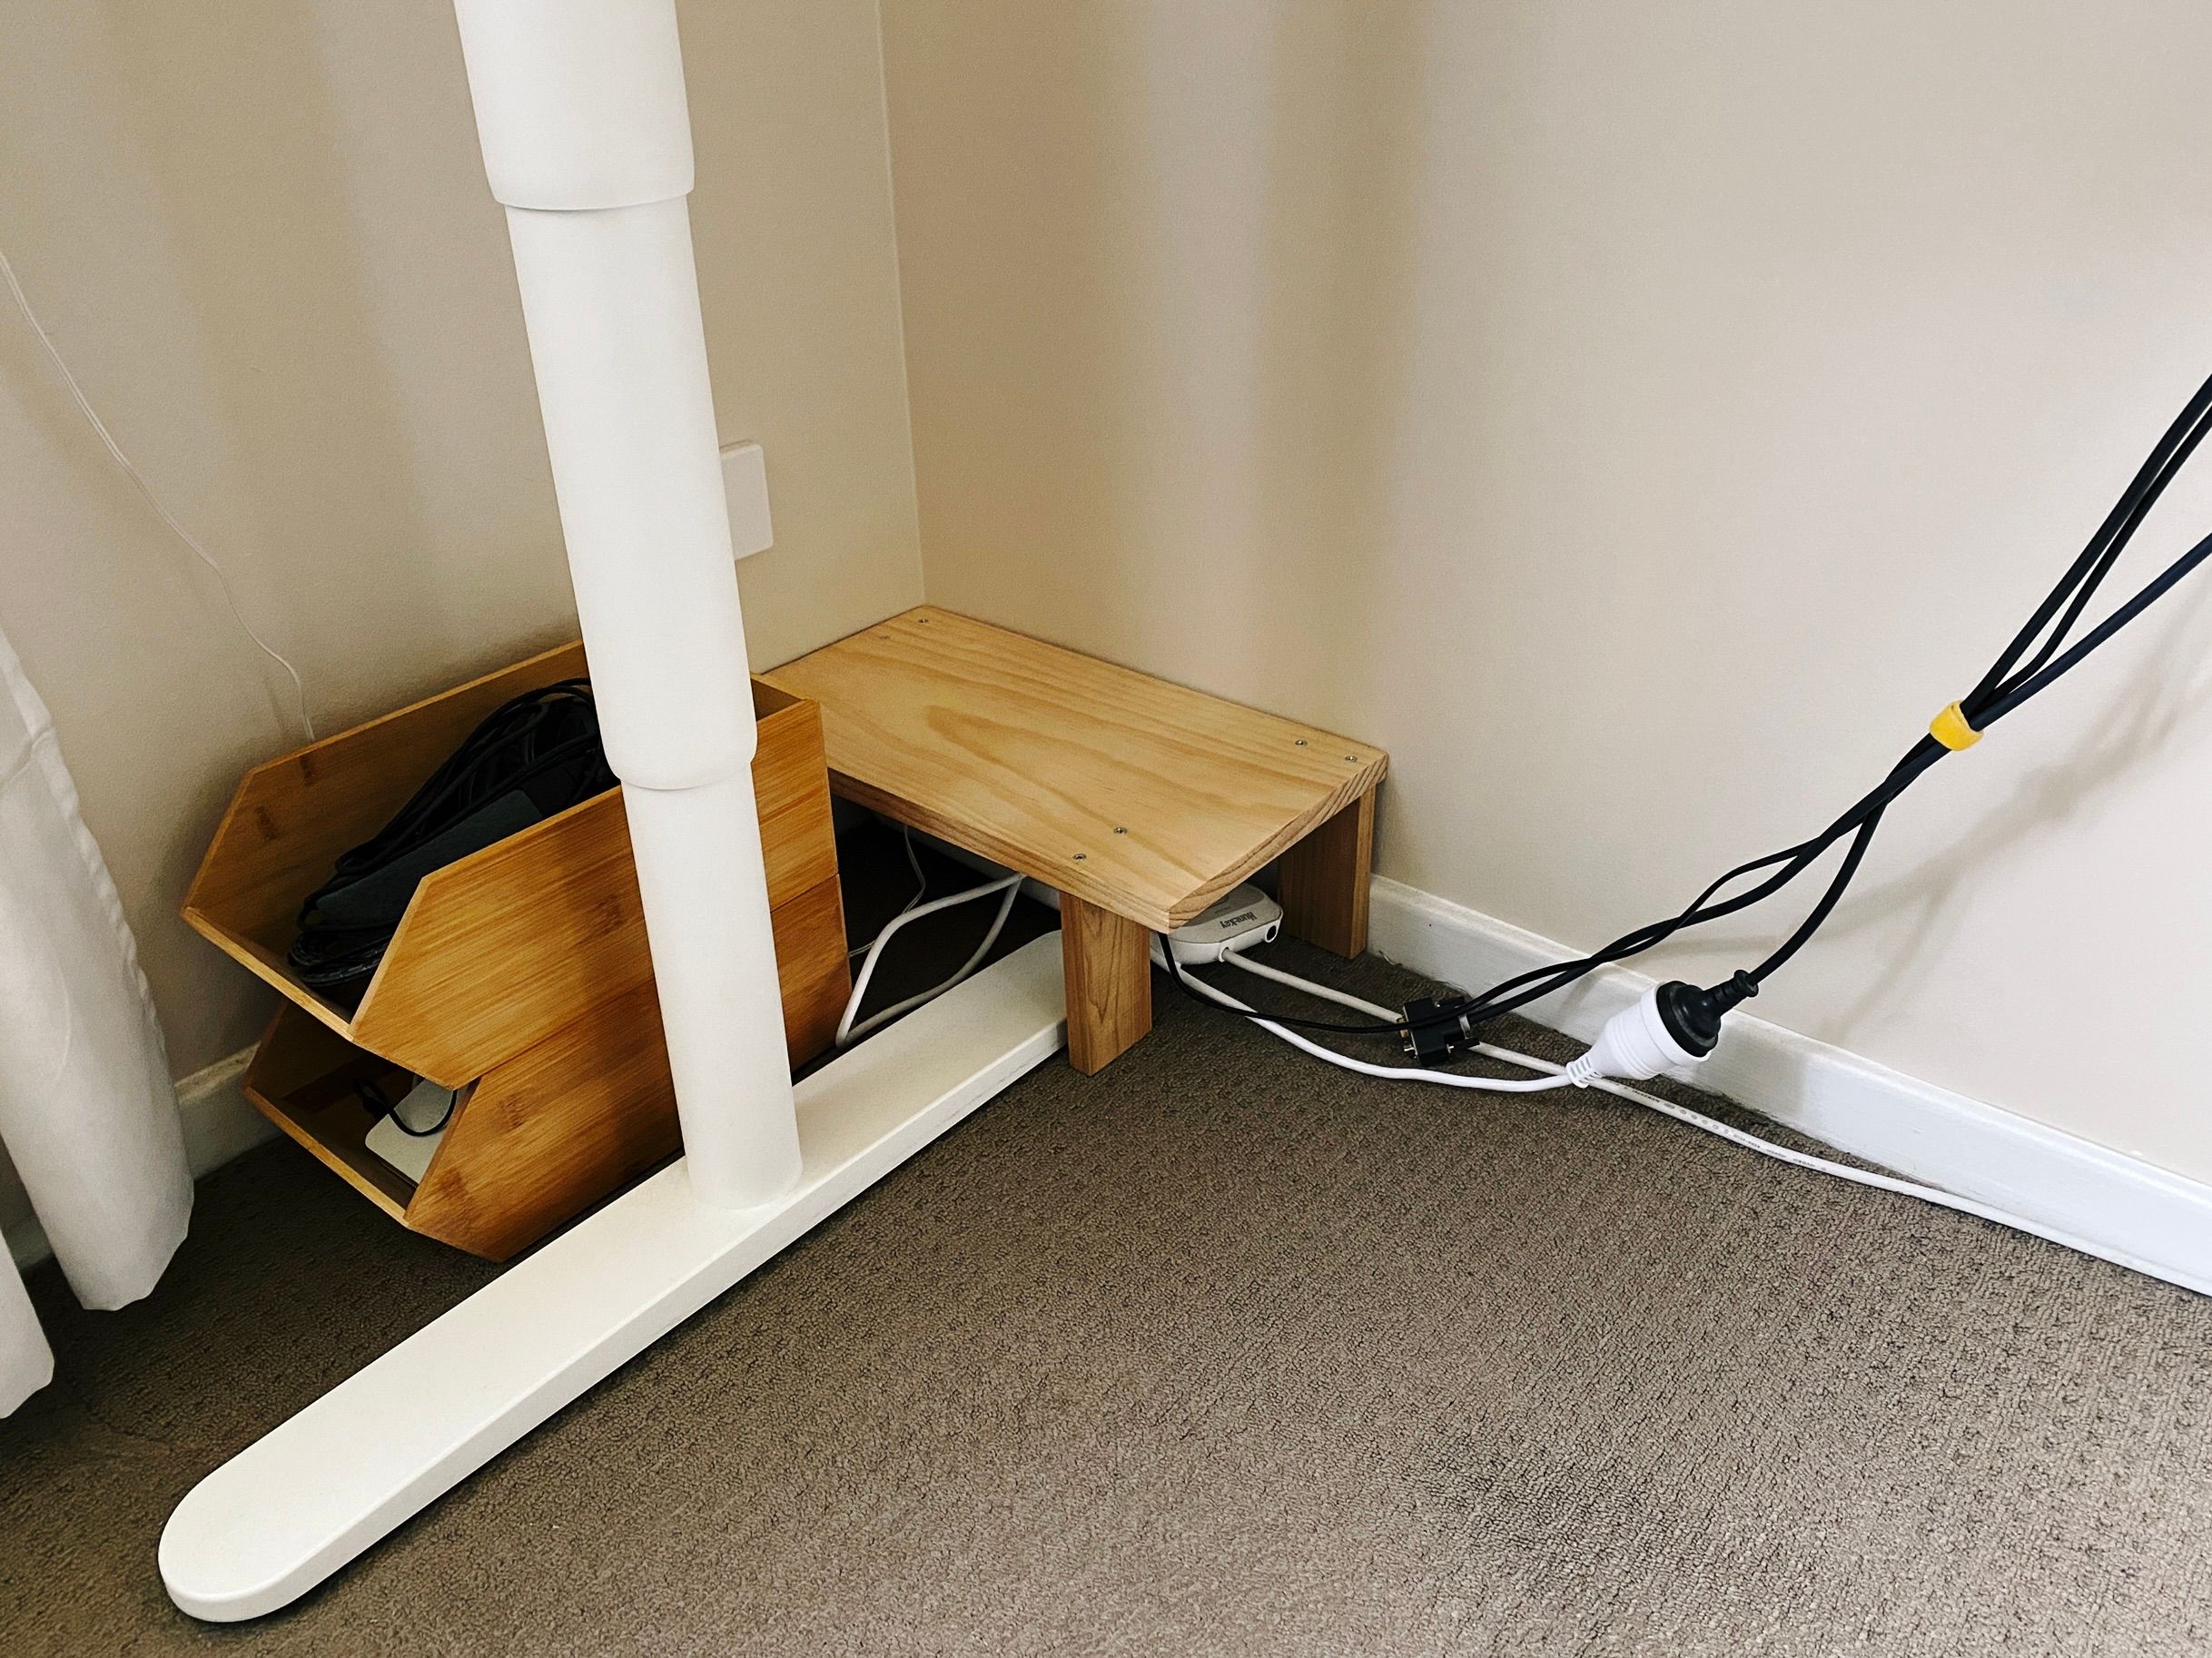 A photo of the corner of a room underneath a standing desk, with a little pine wooden platform on four legs that sits over the top of a power board. The platform itself is about 40cm wide and 23cm deep, and is raised up 13cm off the floor.